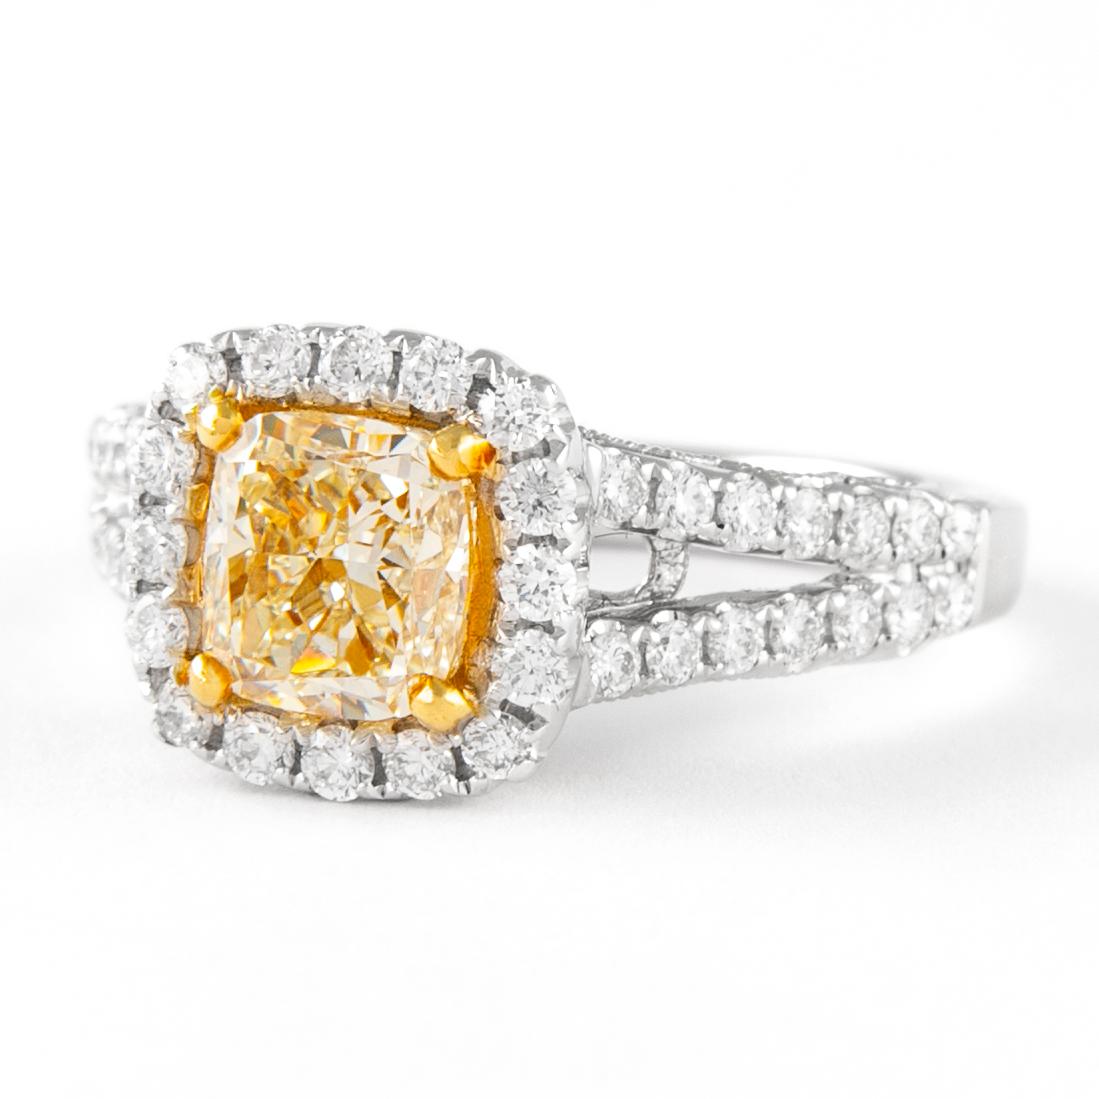 Contemporary Alexander 1.97ctt Fancy Yellow VS1 Cushion Diamond with Halo Ring 18k Two Tone For Sale